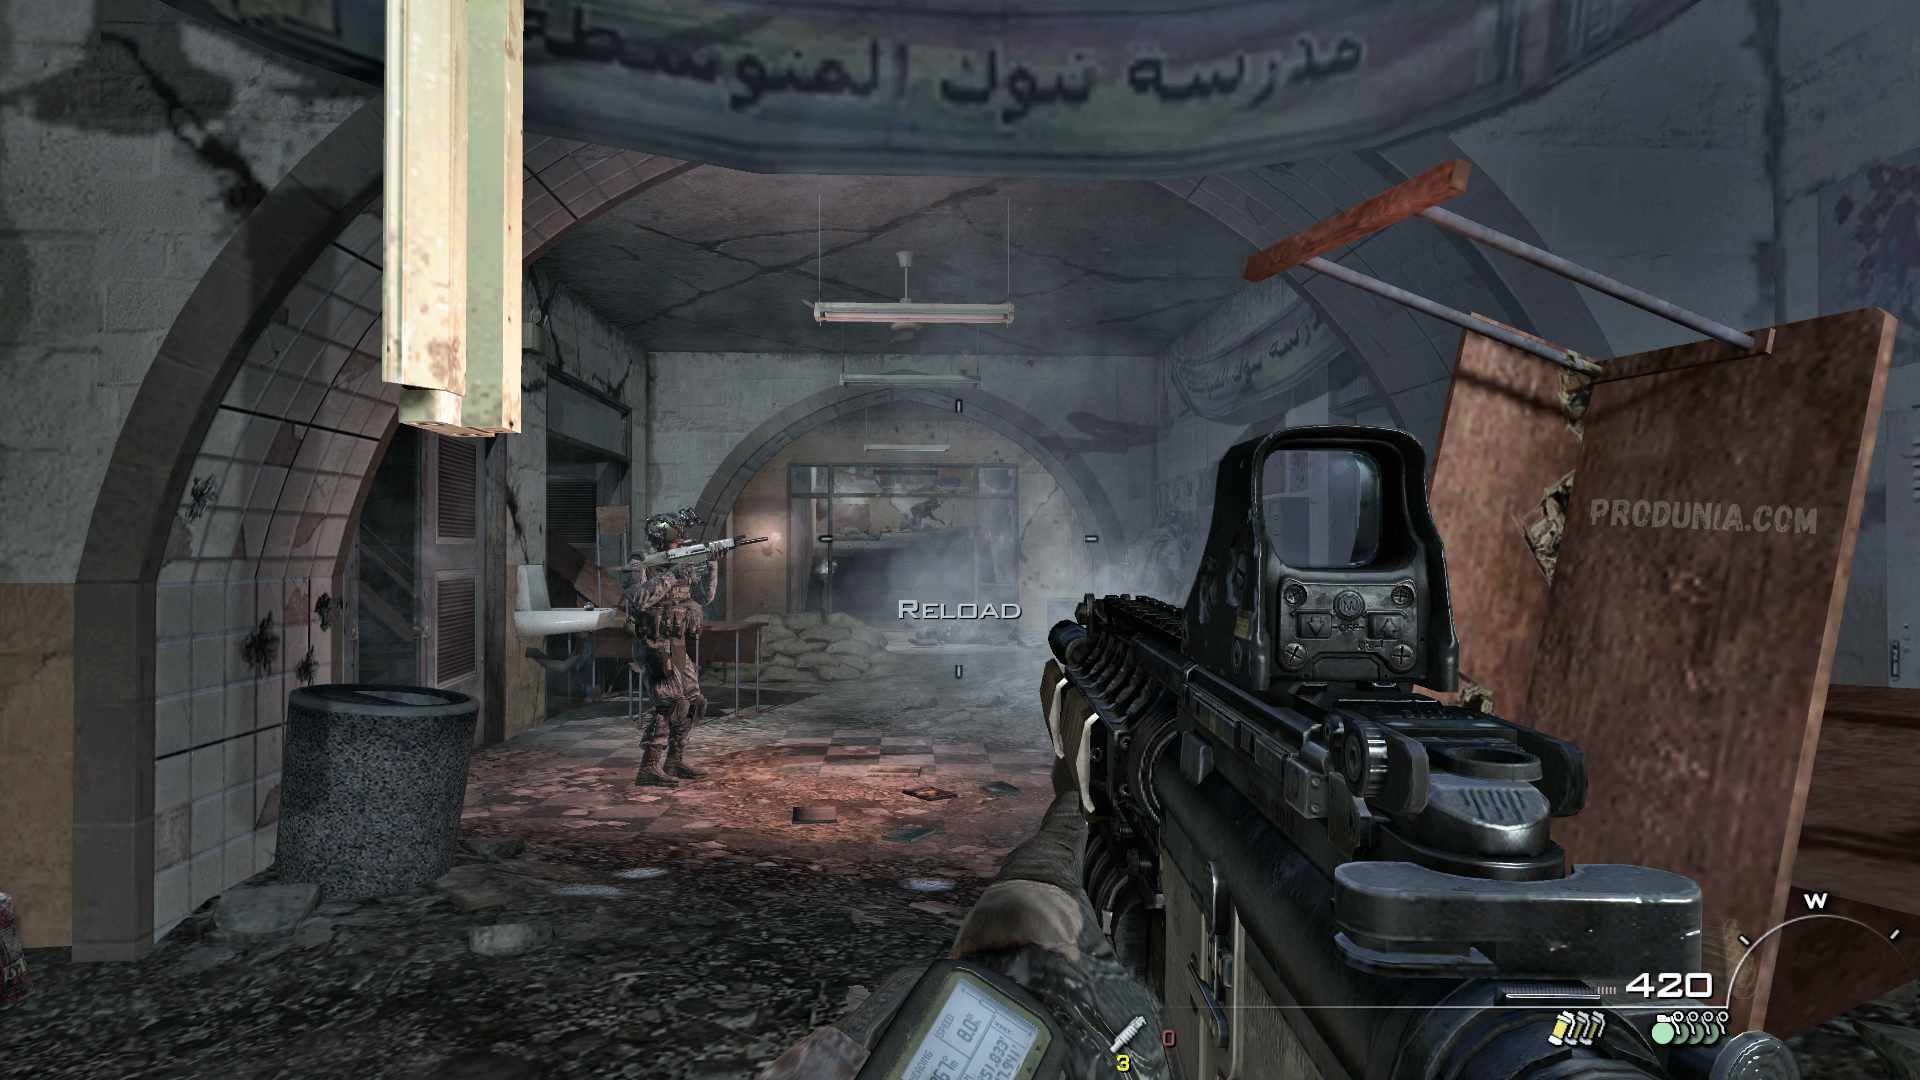 download cod mw 2 highly compressed pc